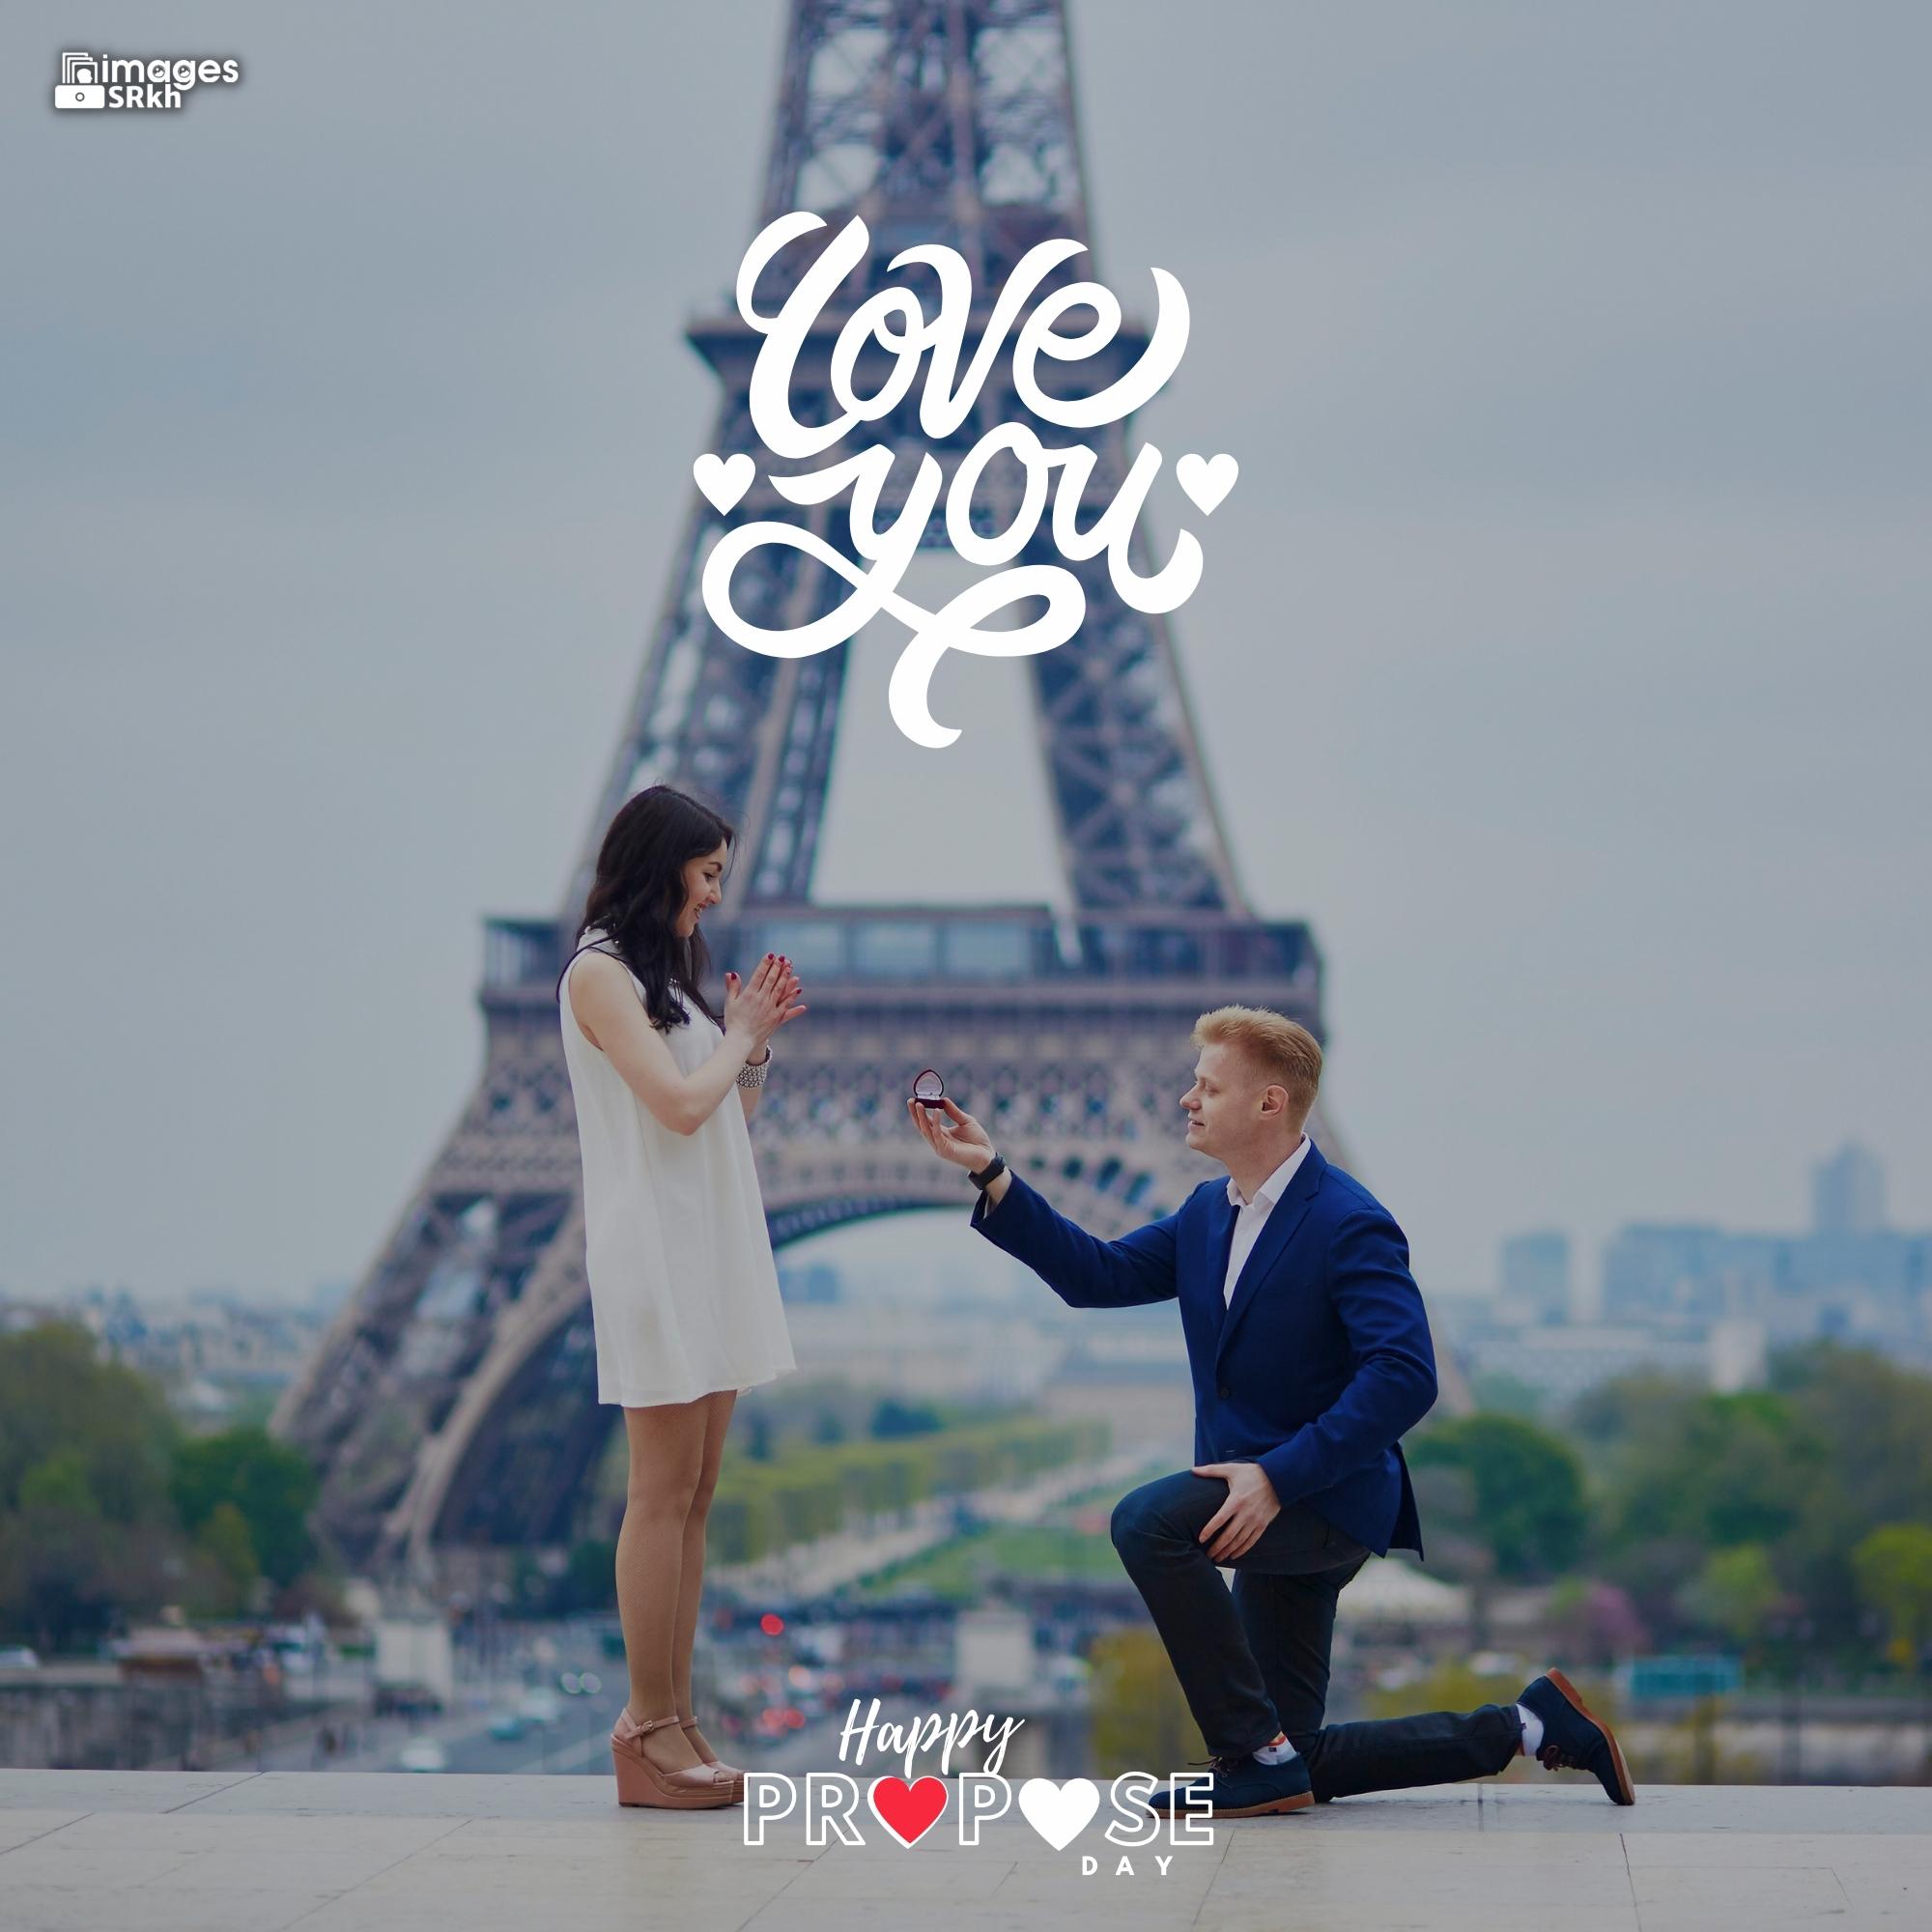 Happy Propose Day Images | 306 | I LOVE YOU